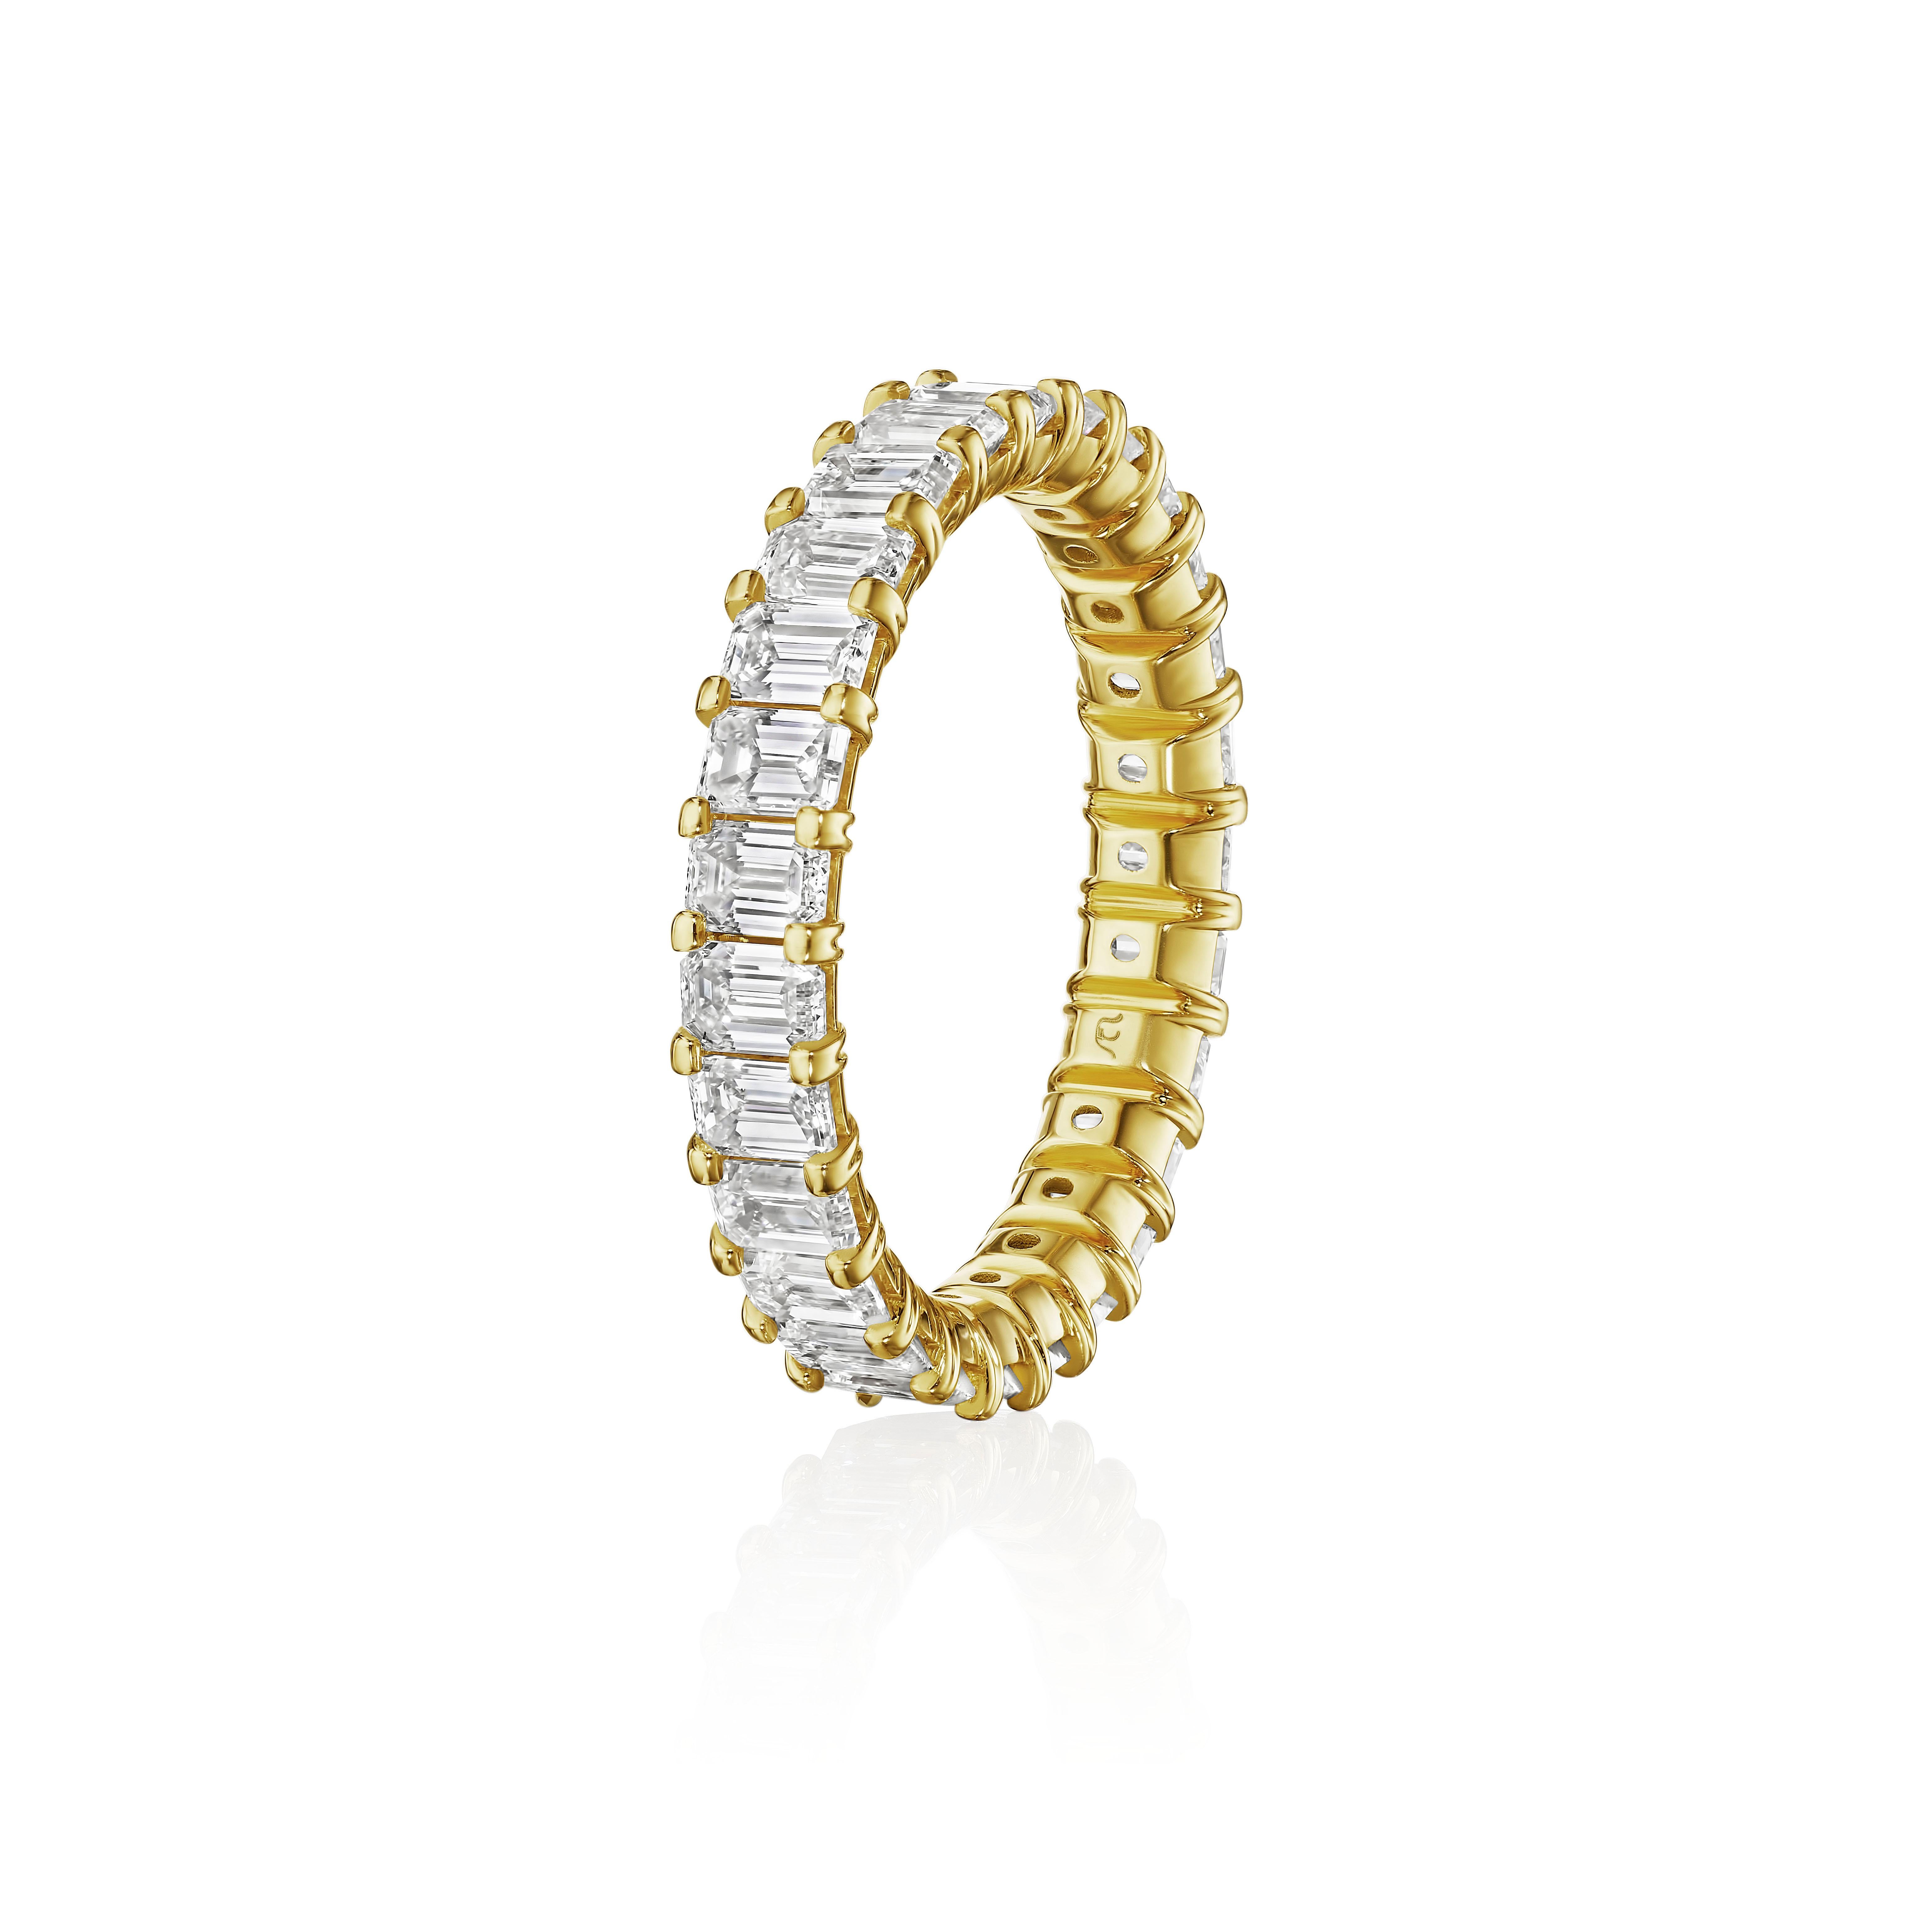 2.75ct Diamond Emerald Cut Eternity Band in 18KT Yellow Gold In New Condition For Sale In New York, NY